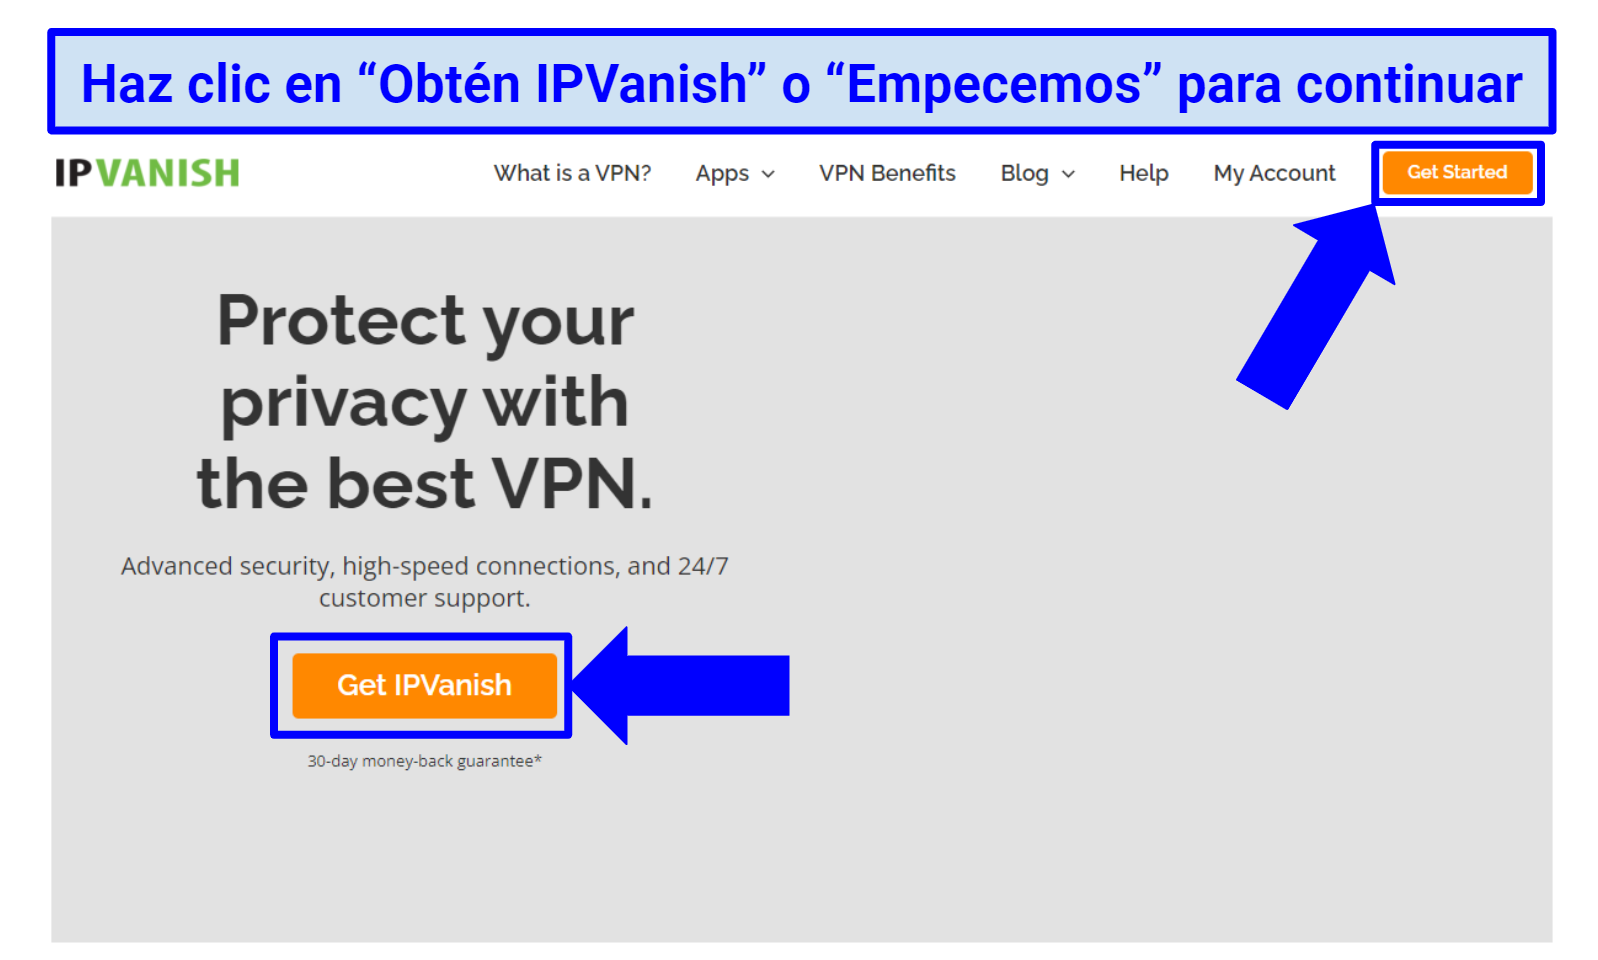 Screenshot showing the IPVanish home page and how to start the sign-up process